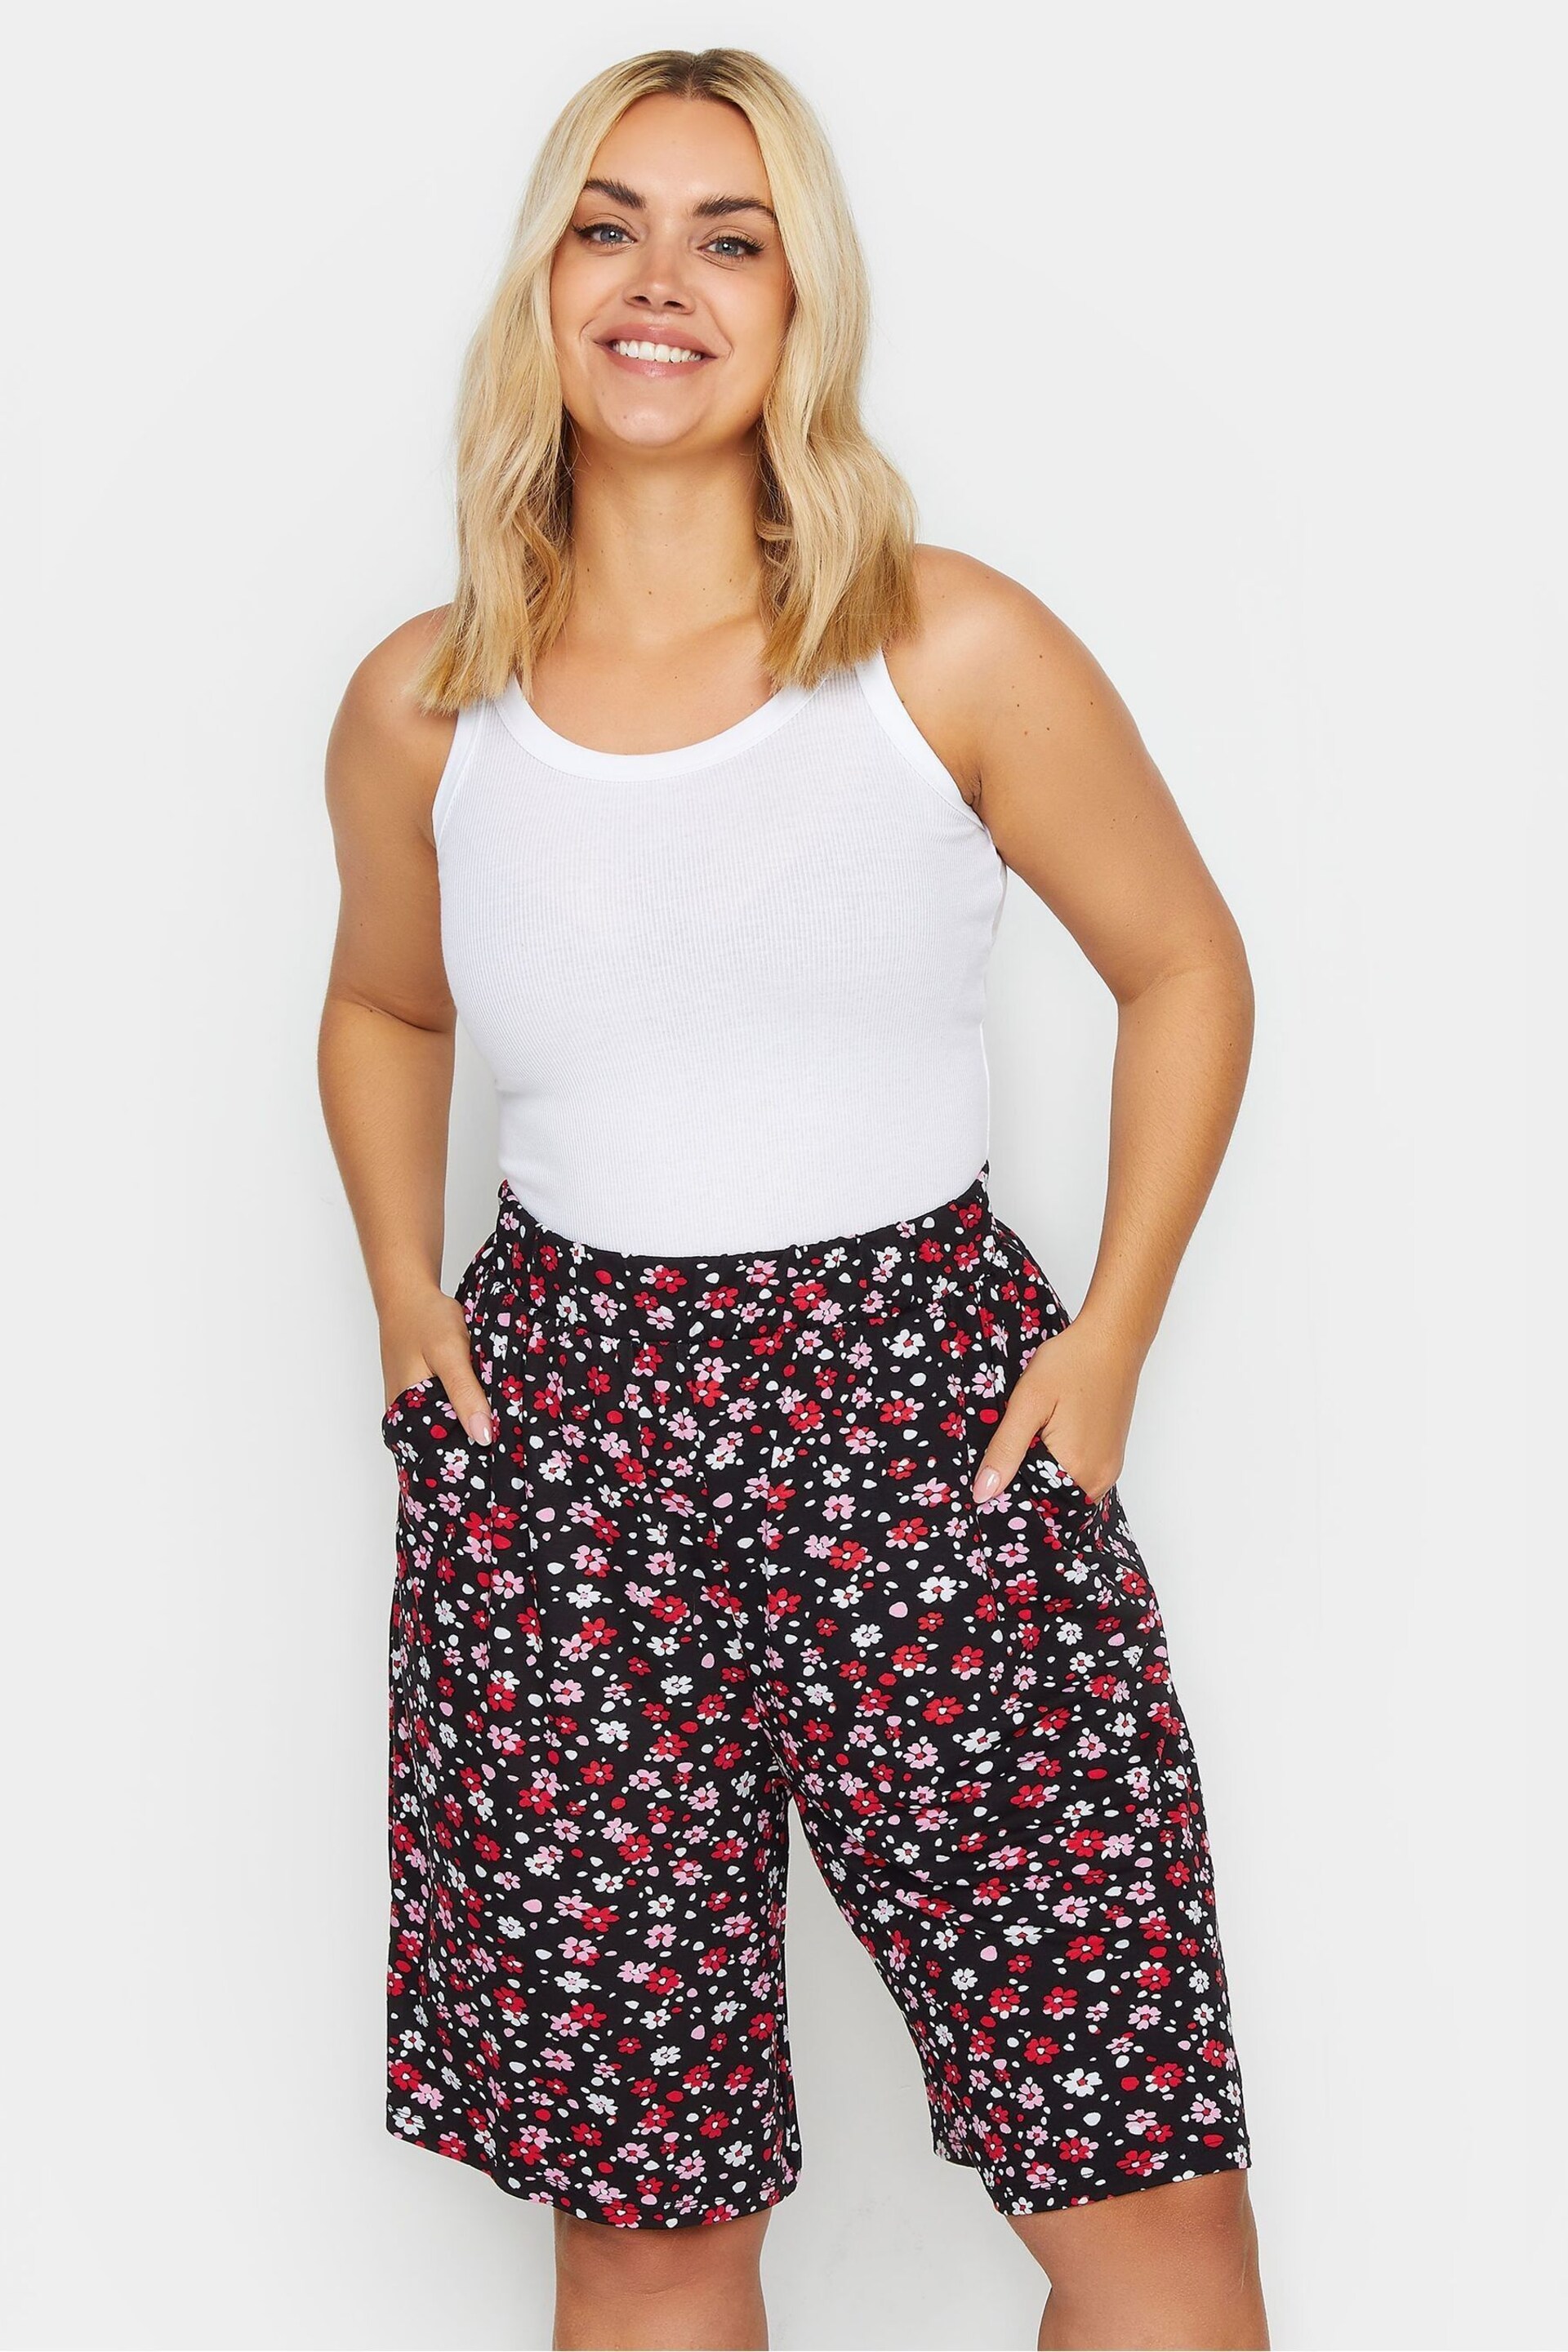 Yours Curve Black Floral Print Shorts - Image 1 of 5